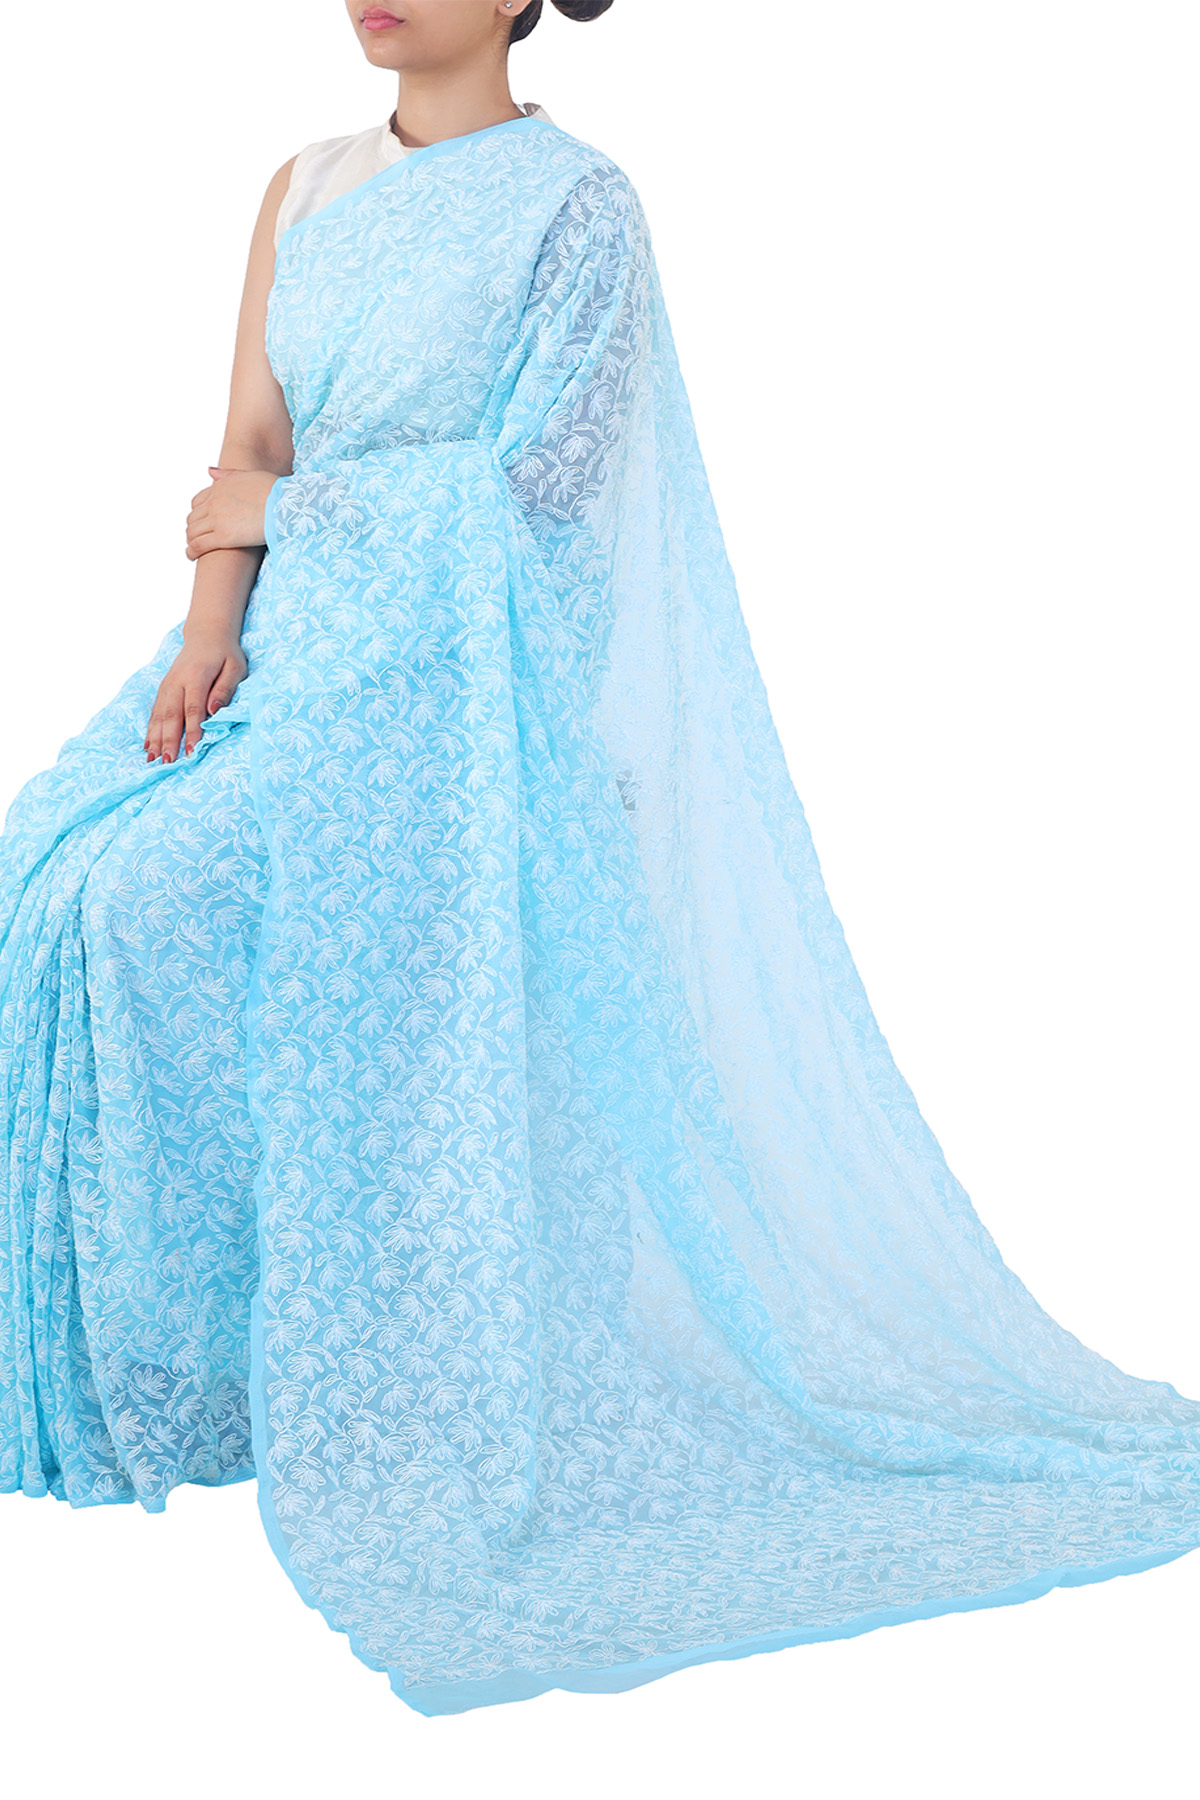 Sky Blue colour Hand Embroidered Tepchi Work Lucknowi Chikankari Saree With Blouse (Faux Georgette) MC251955